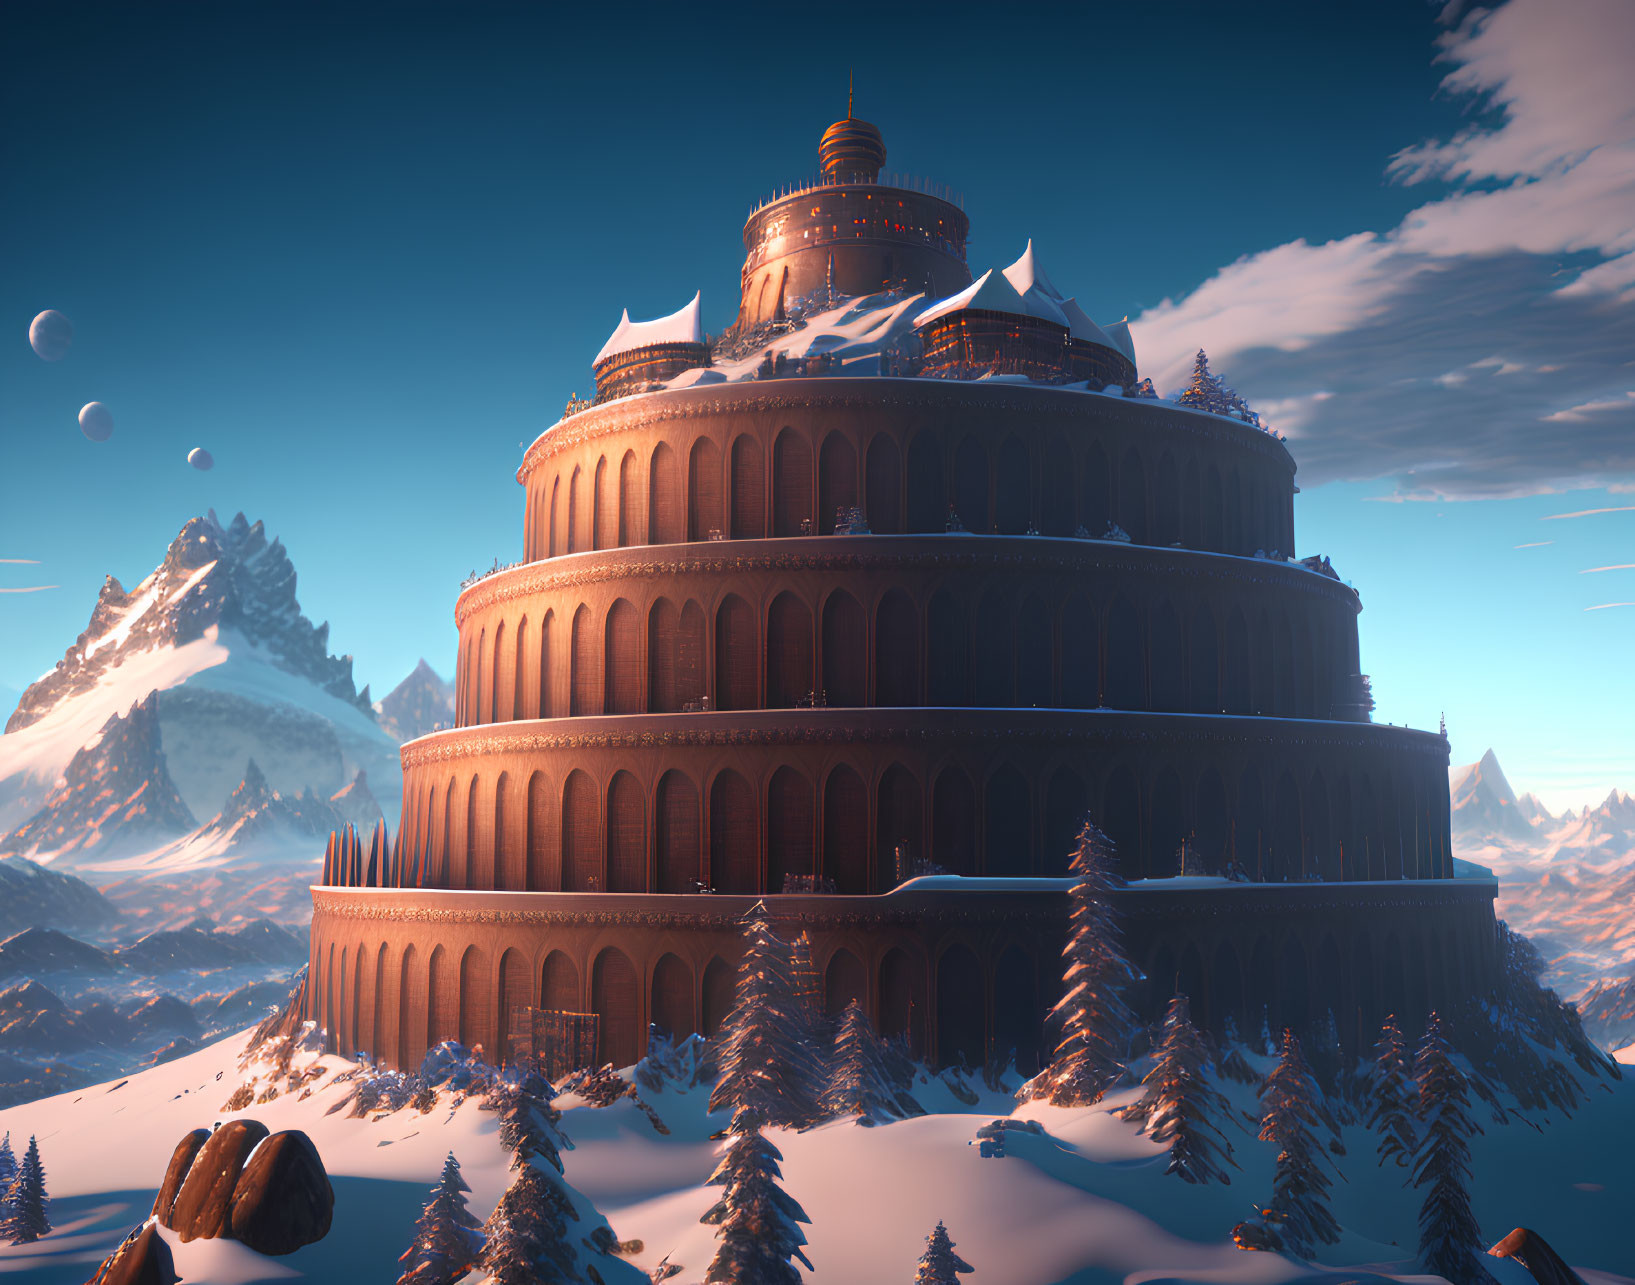 Circular Multi-tiered Building in Snowy Landscape with Mountains and Planets